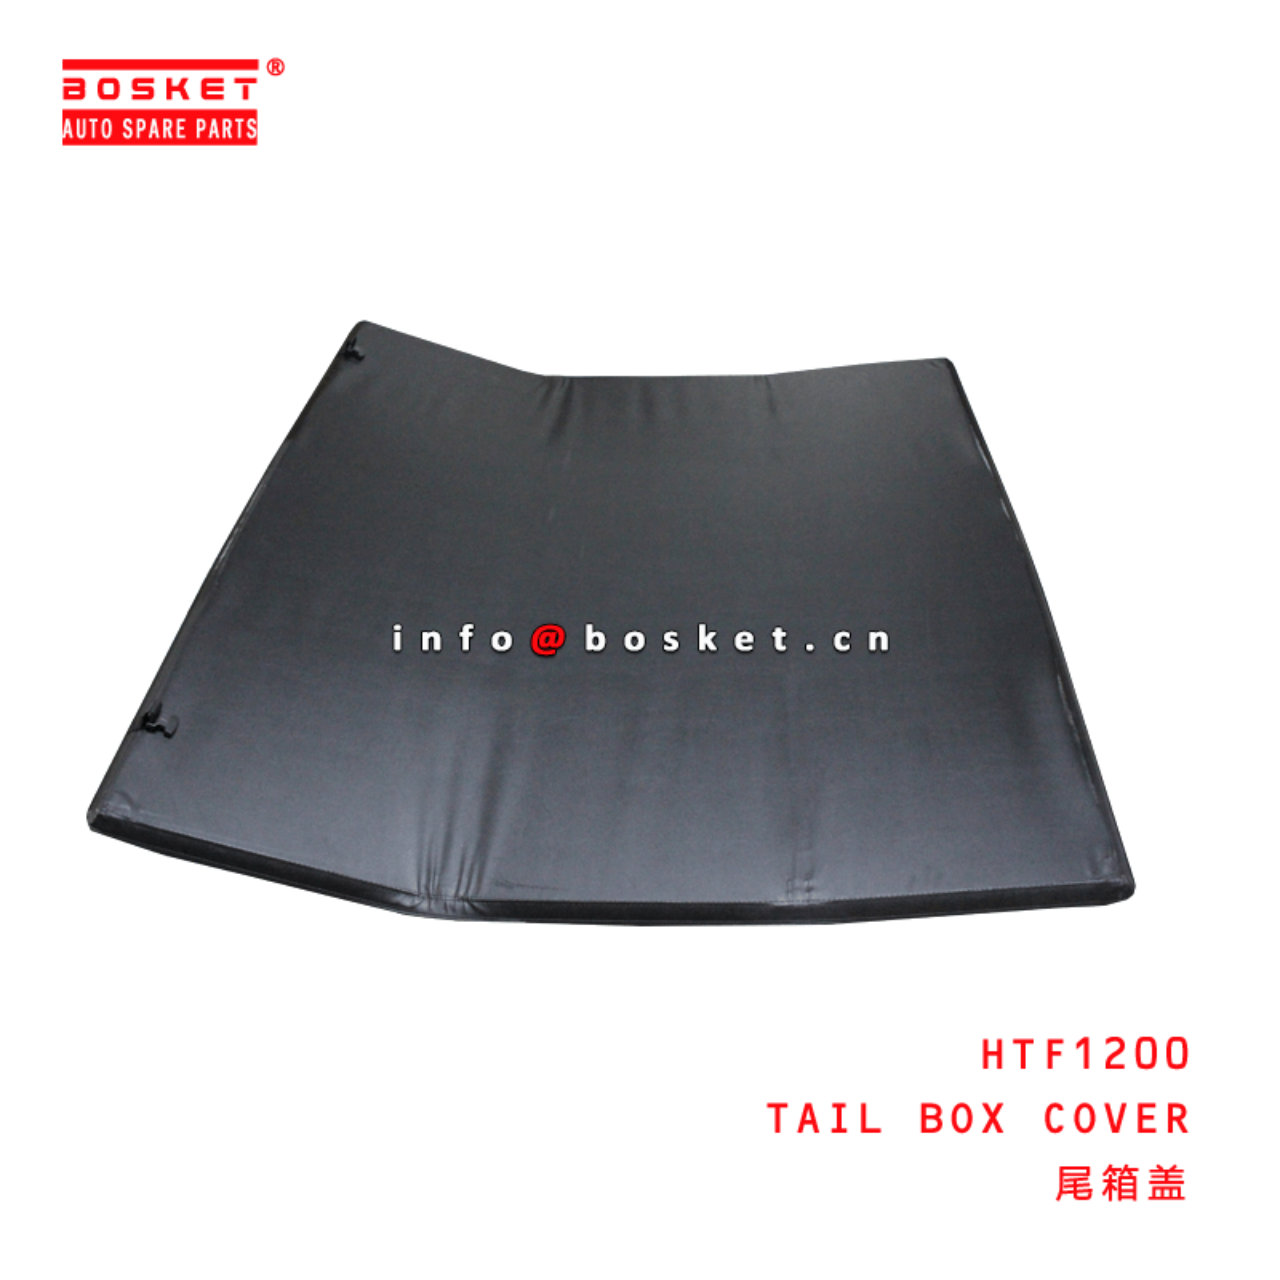  HTF1200 Tail Box Cover Suitable for ISUZU D-MAX 2017